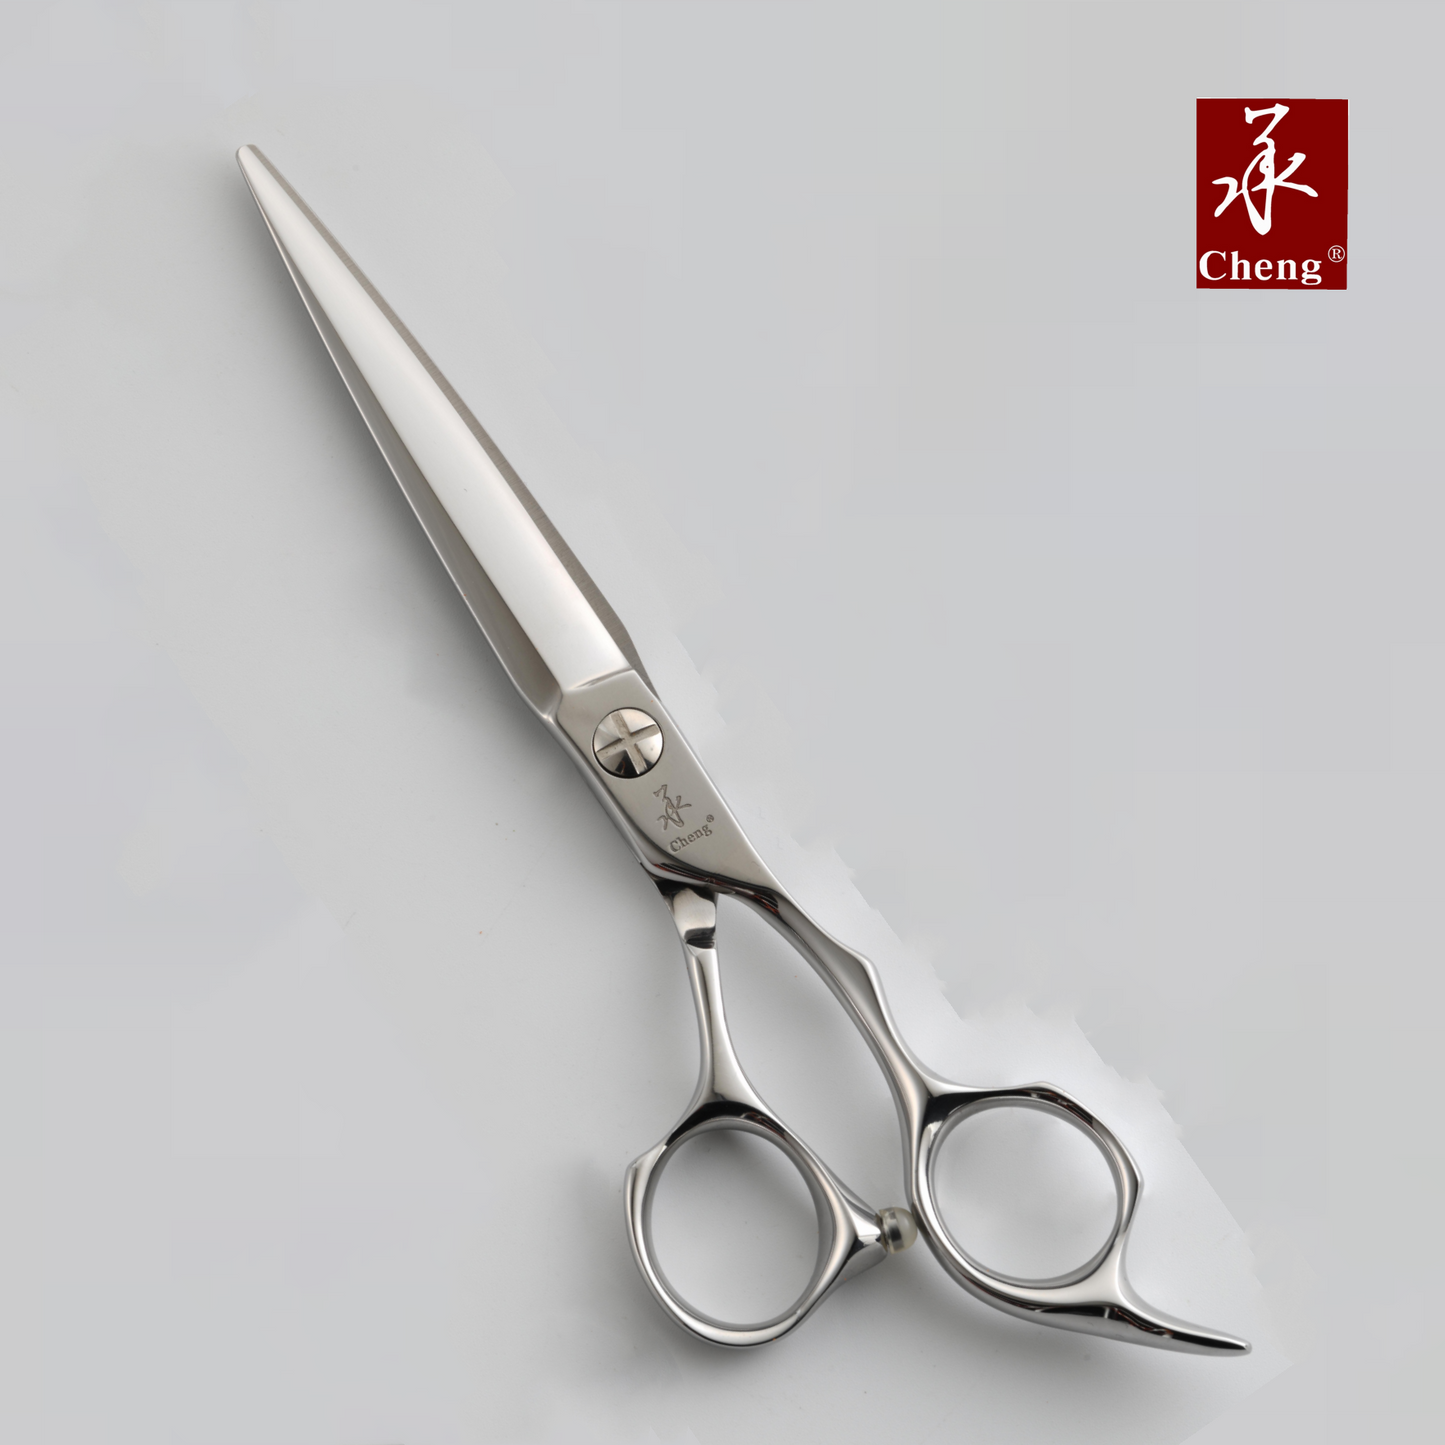 AAD-627T Hair Thinning Scissors 6.0 Inch 27T About=20%~25%